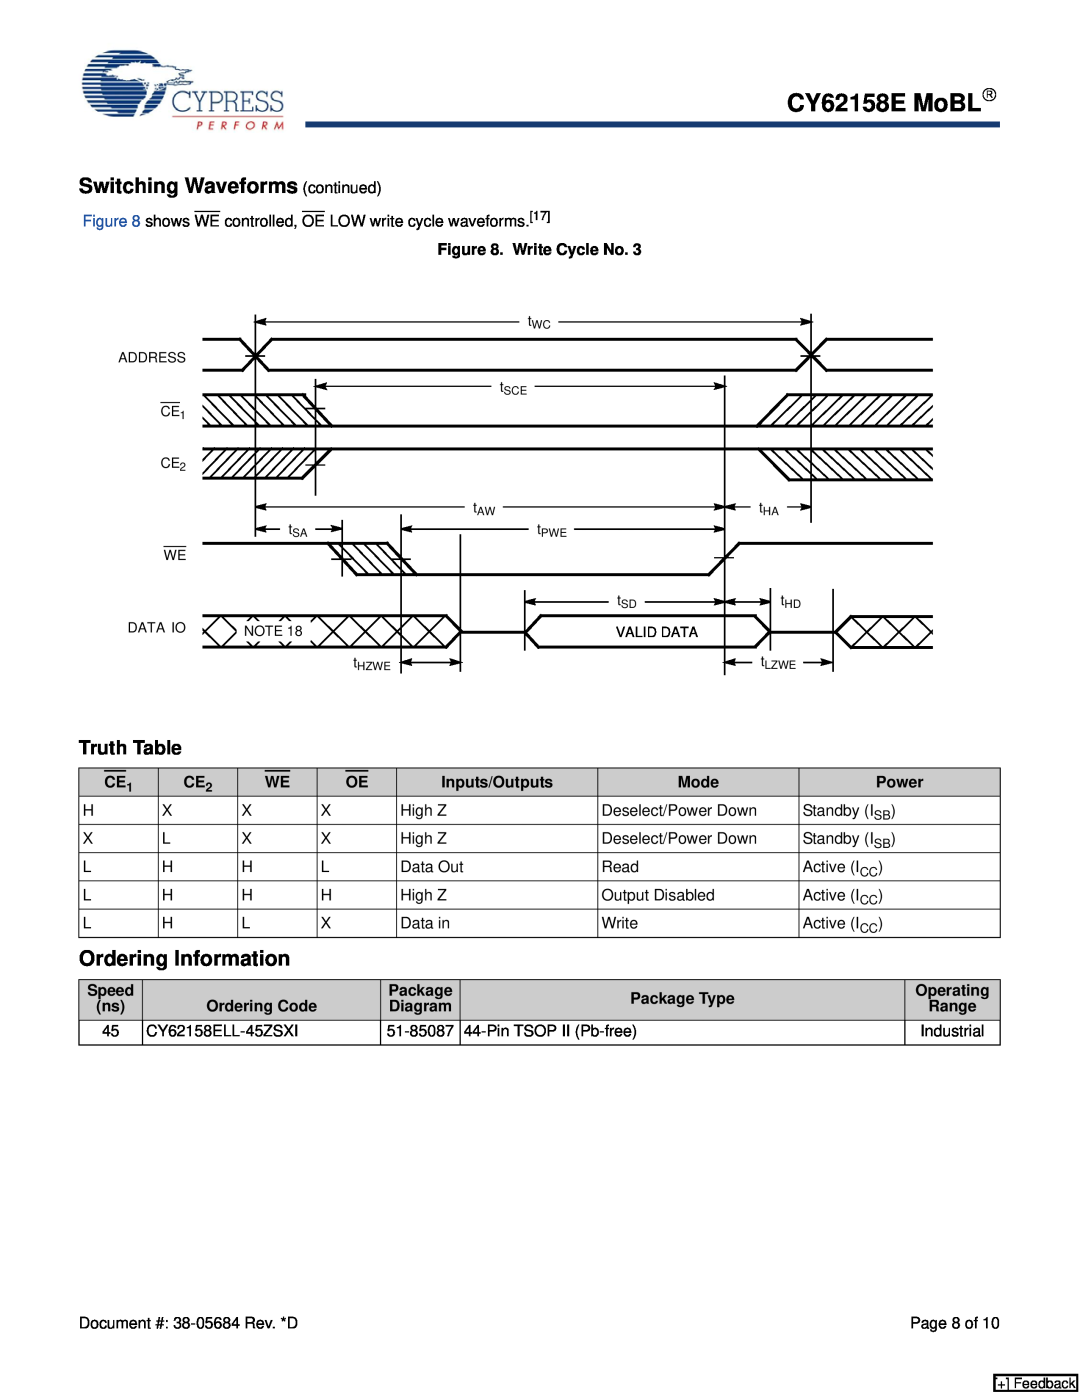 Cypress manual Ordering Information, Truth Table, CY62158E MoBL→, Switching Waveforms continued, Industrial 